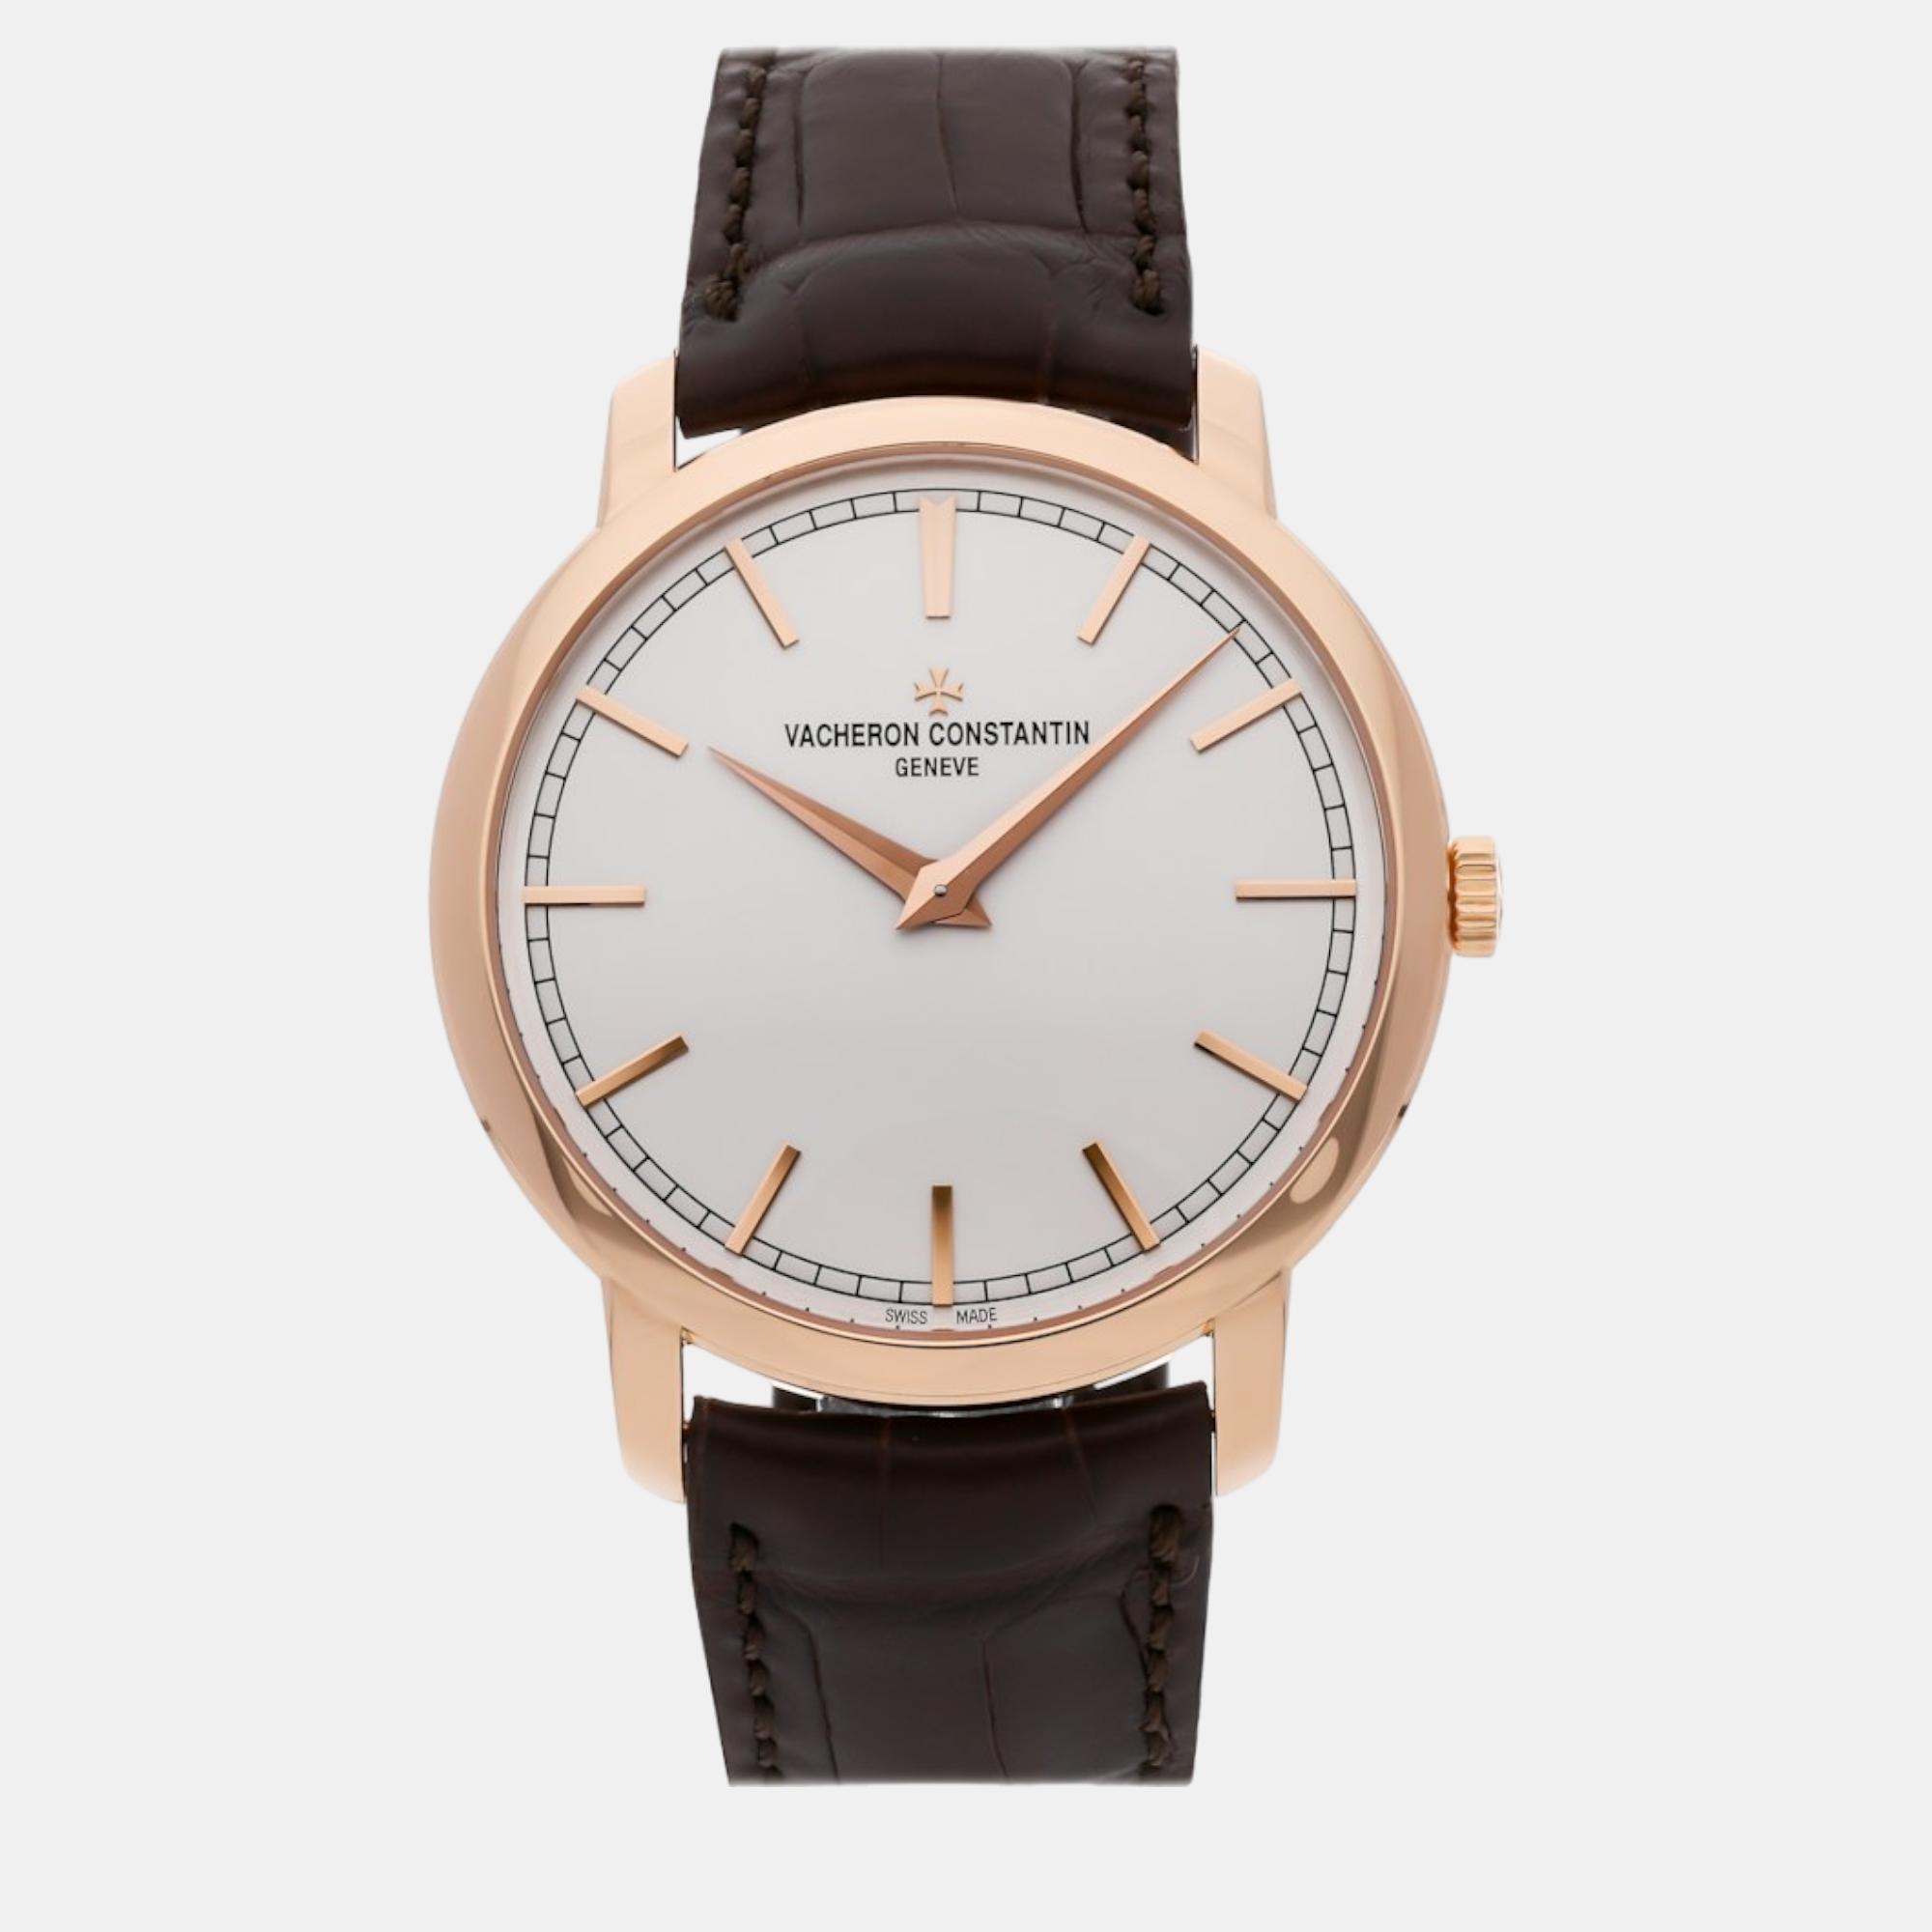 A timeless silhouette made of high quality materials and packed with precision and luxury makes this wristwatch the perfect choice for a sophisticated finish to any look. It is a grand creation to elevate the everyday experience.